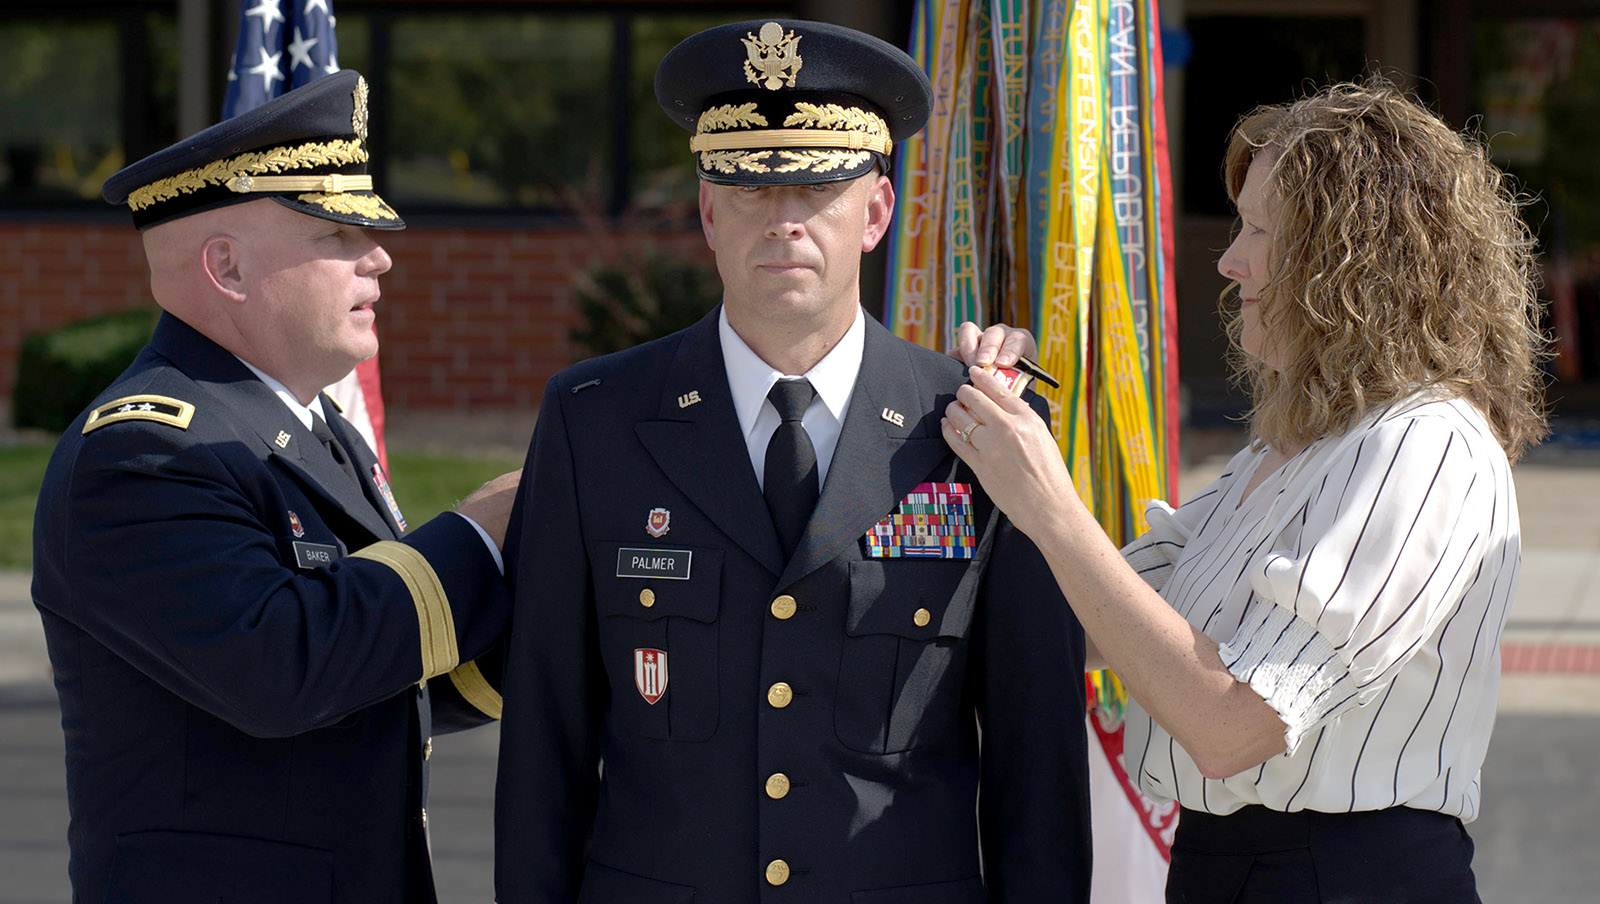 Noel Palmer was promoted to brigadier general in the U.S. Army Reserve last month during a ceremony at Fort Snelling, Minnesota. (U.S. Army photo by Capt. Floice Kemp, Unit Public Affairs Representative)